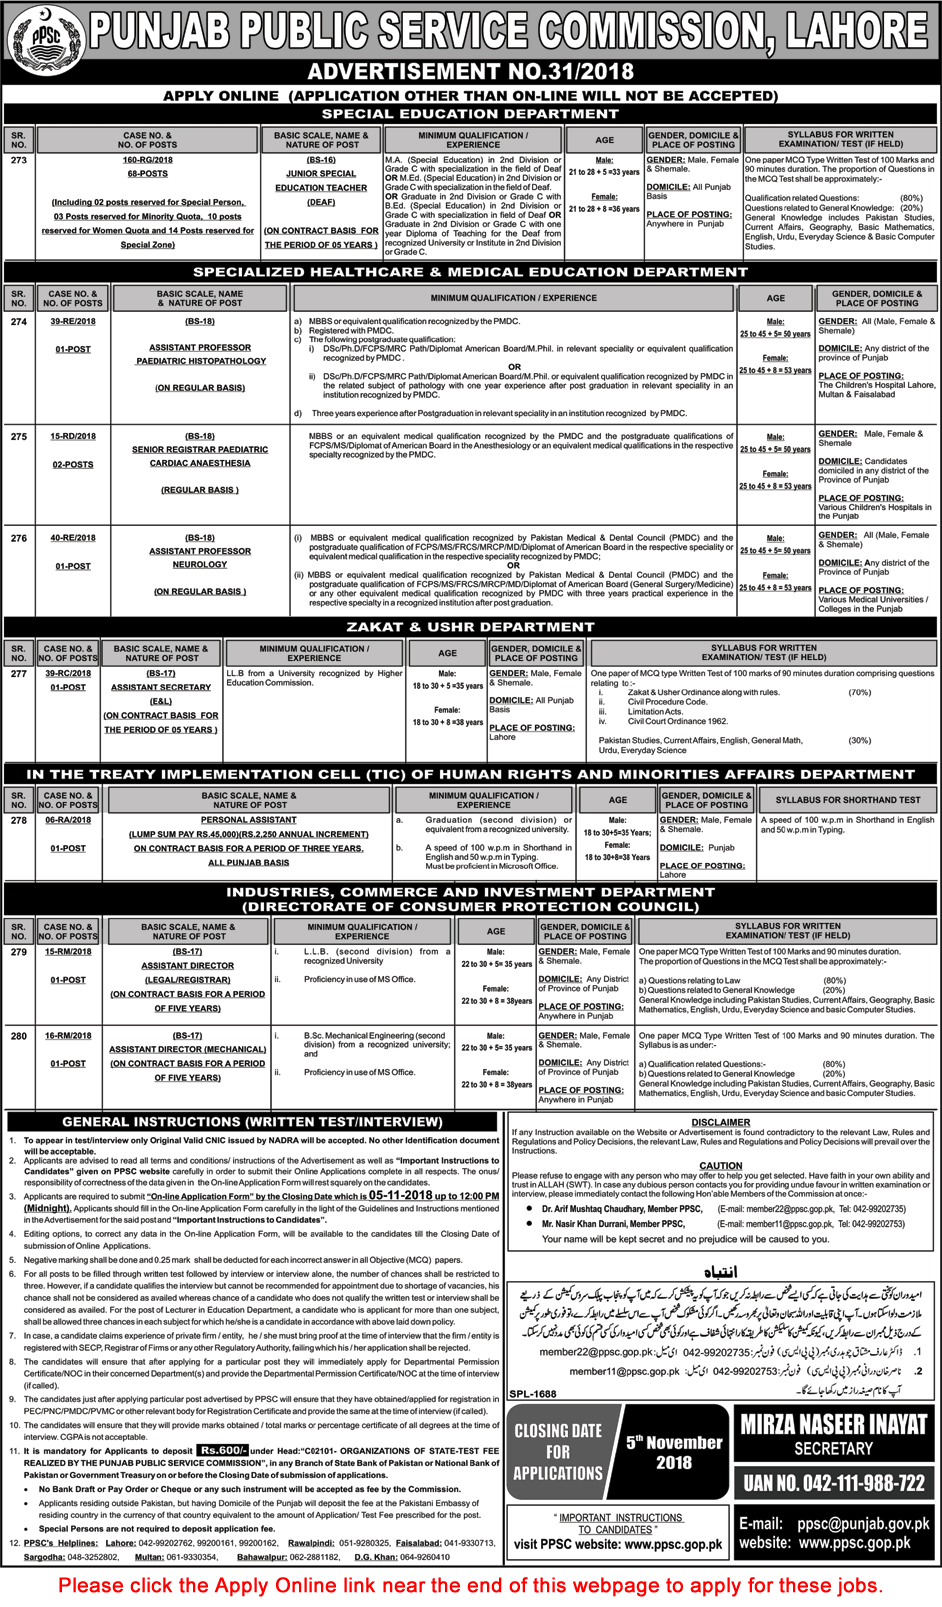 PPSC Jobs October 2018 Apply Online Consolidated Advertisement No 31/2018 Latest